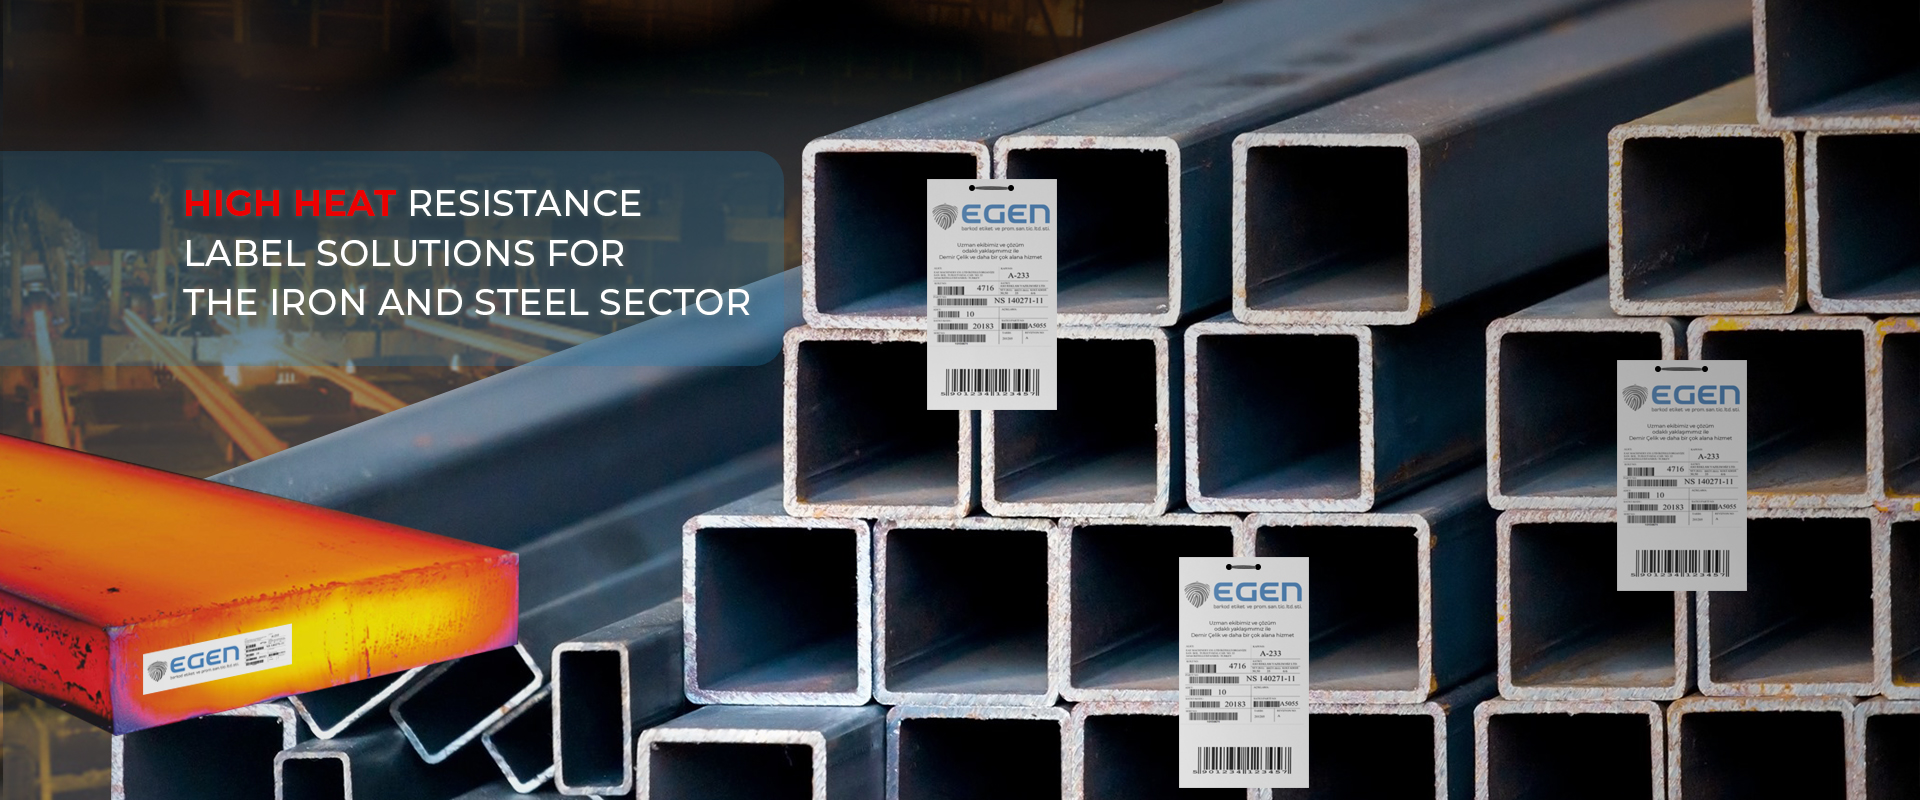 HIGH HEAT RESISTANCE LABEL SOLUTIONS FOR THE IRON AND STEEL SECTOR